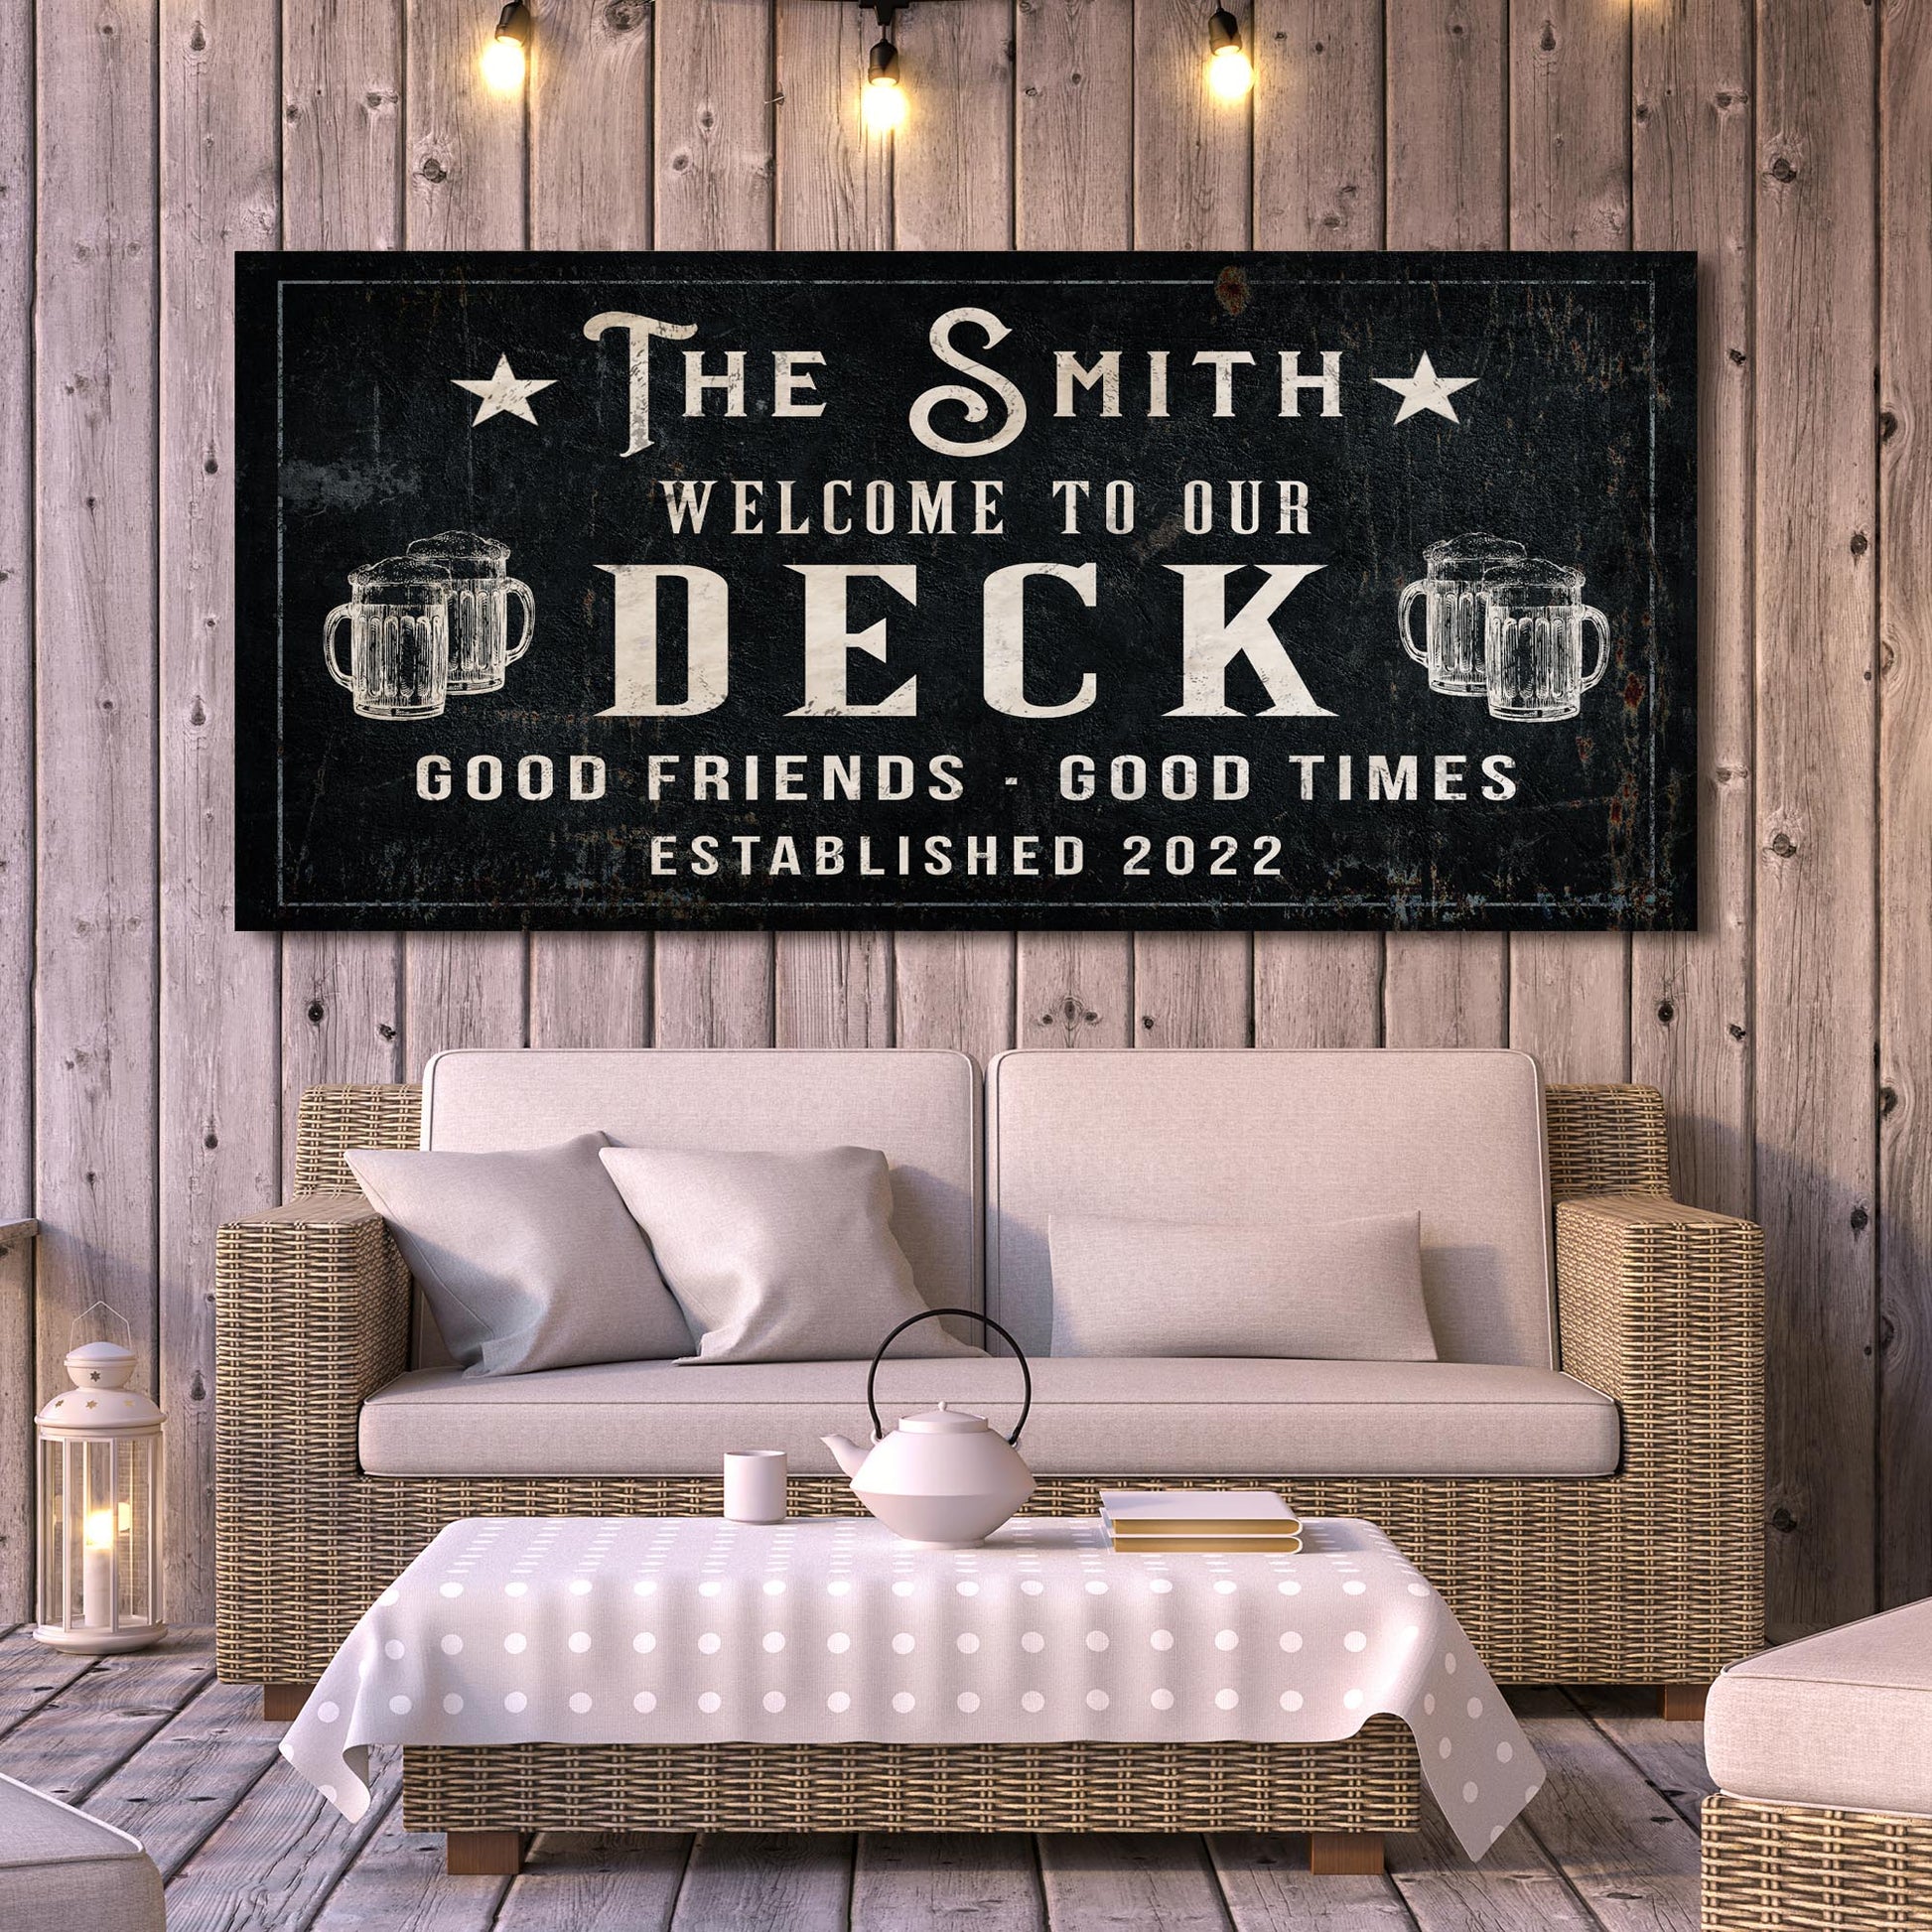 Good Friends Good Times Welcome To Our Deck Sign | Customizable Canvas - Image by Tailored Canvases